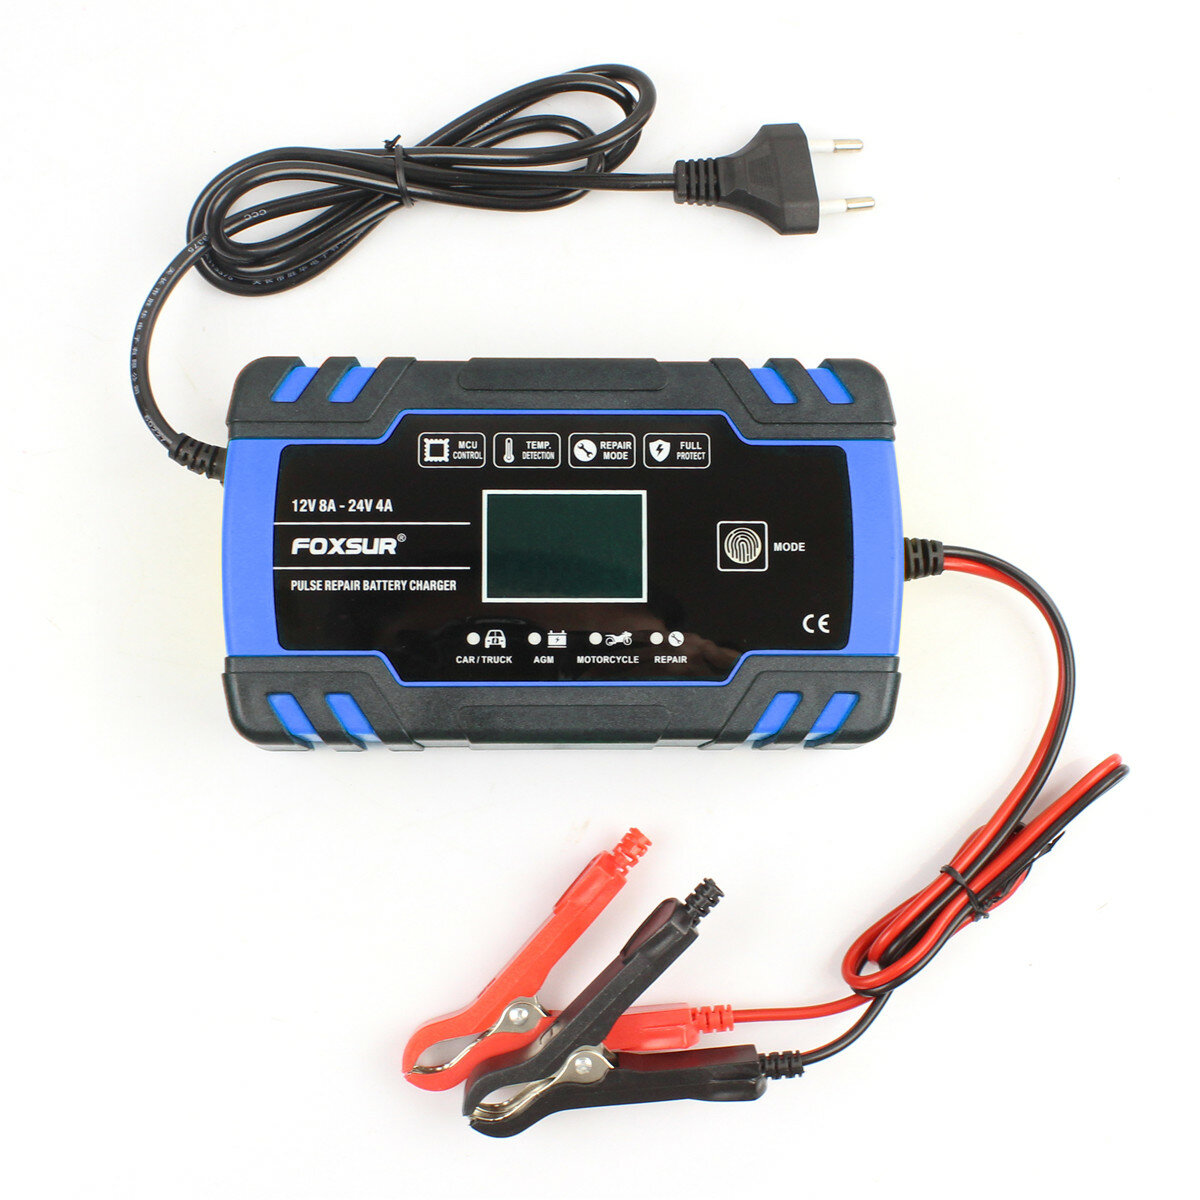 

FOXSUR 12V 24V 8A 4A Touch Screen Pulse Repair LCD Battery Charger Blue For Car Motorcycle Lead Acid Battery Agm Gel Wet